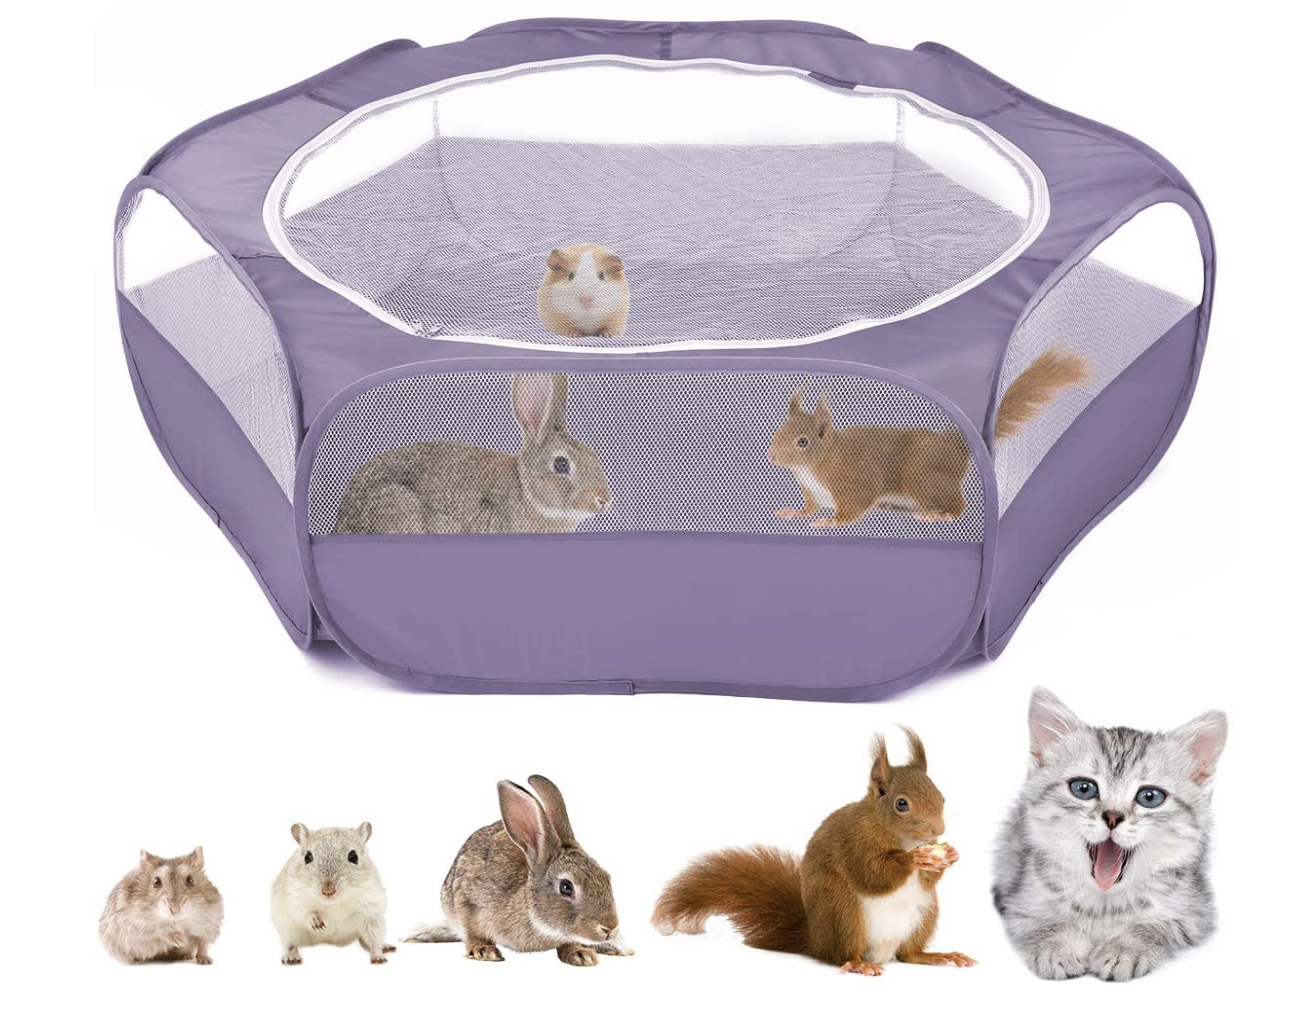 The playpen with a bunny, guinea pig, and squirrel in it, and a lineup of small animals underneath